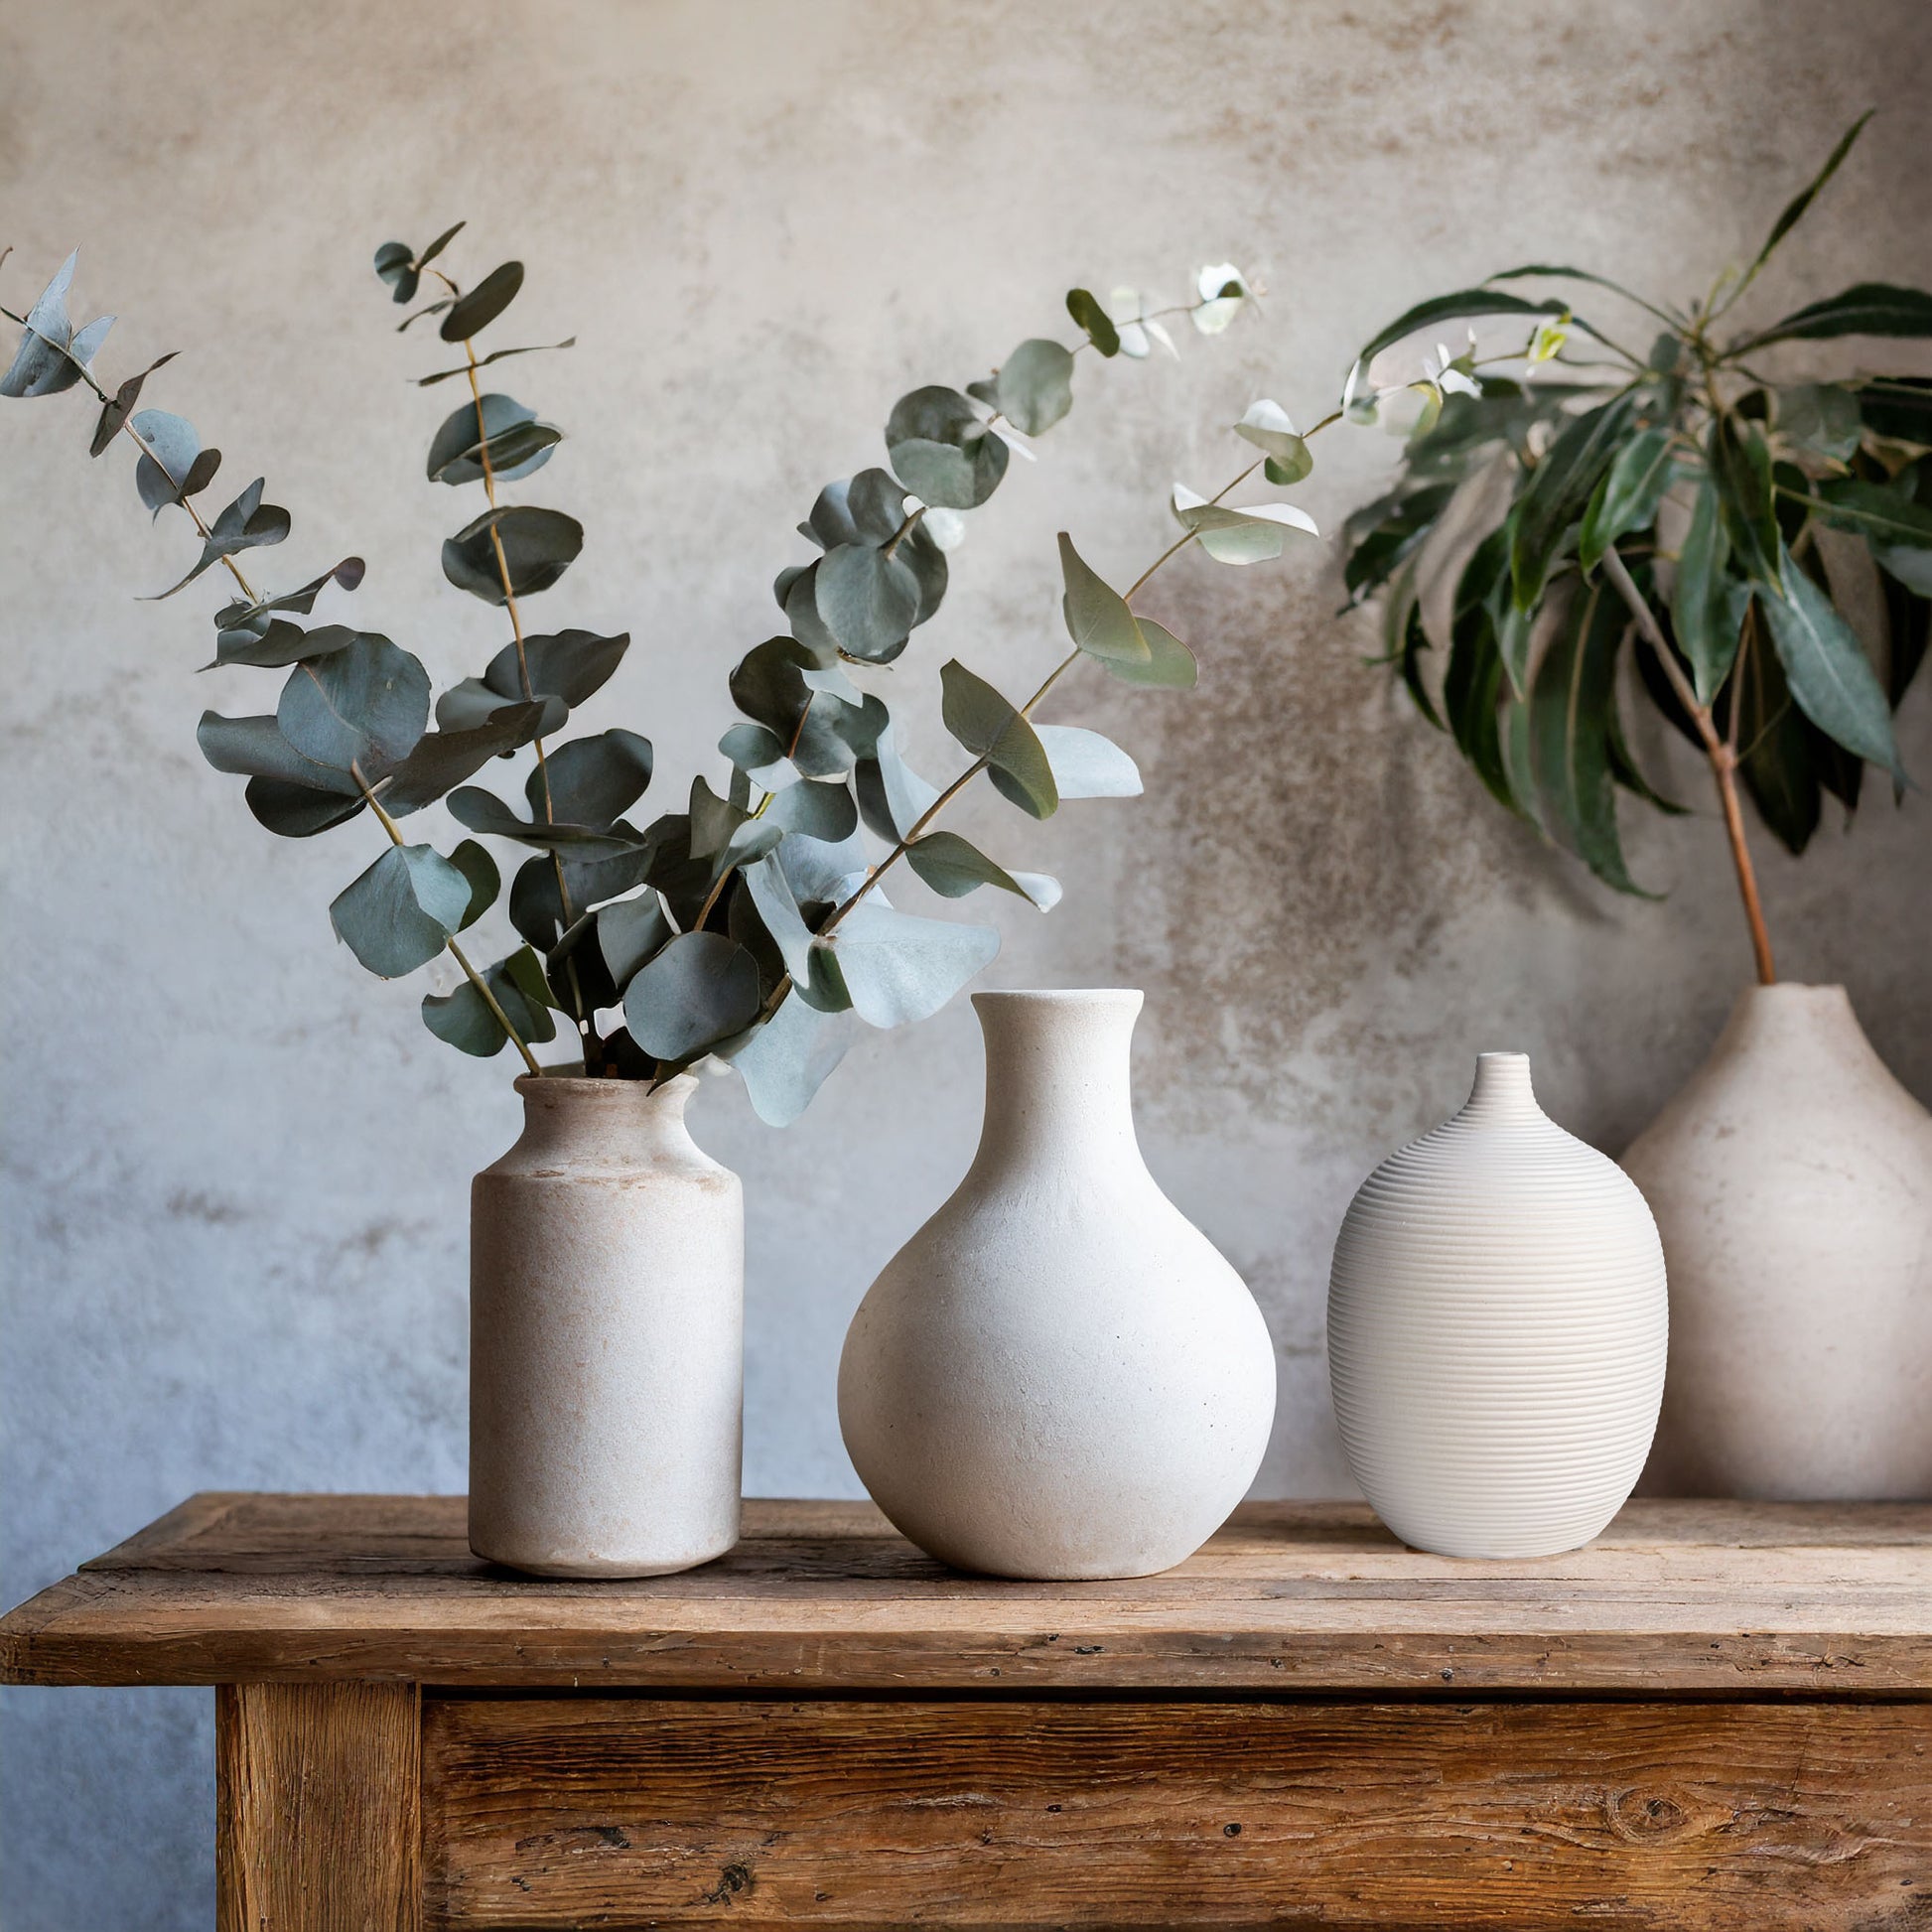 Ribbed white ceramic vase on table with ceramic vases filled with botanicals.